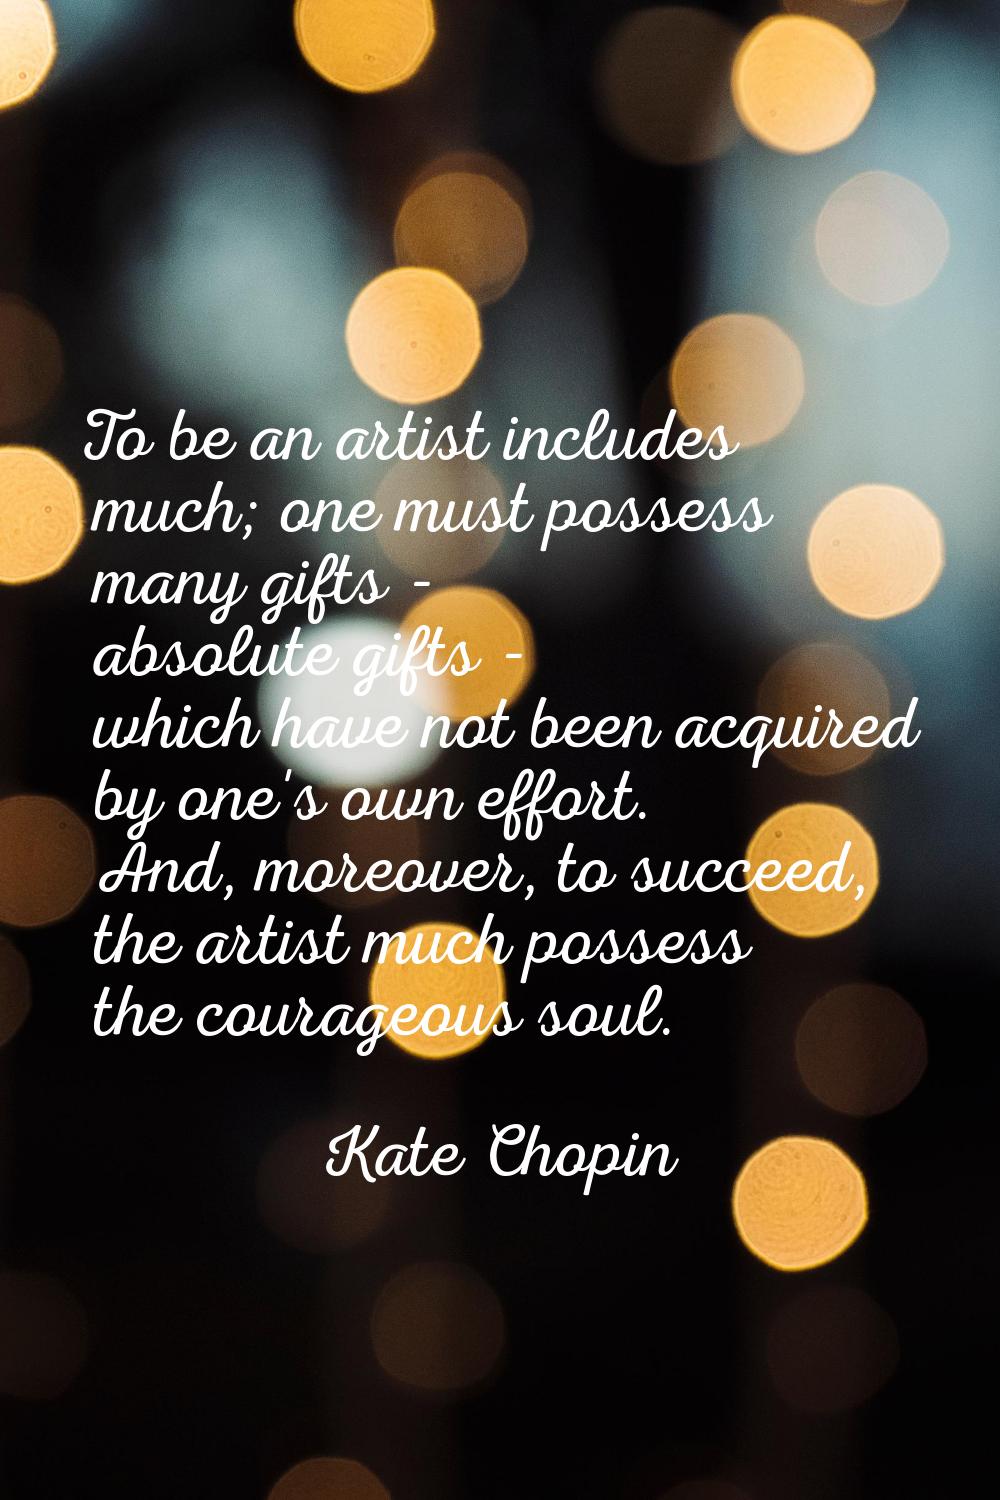 To be an artist includes much; one must possess many gifts - absolute gifts - which have not been a